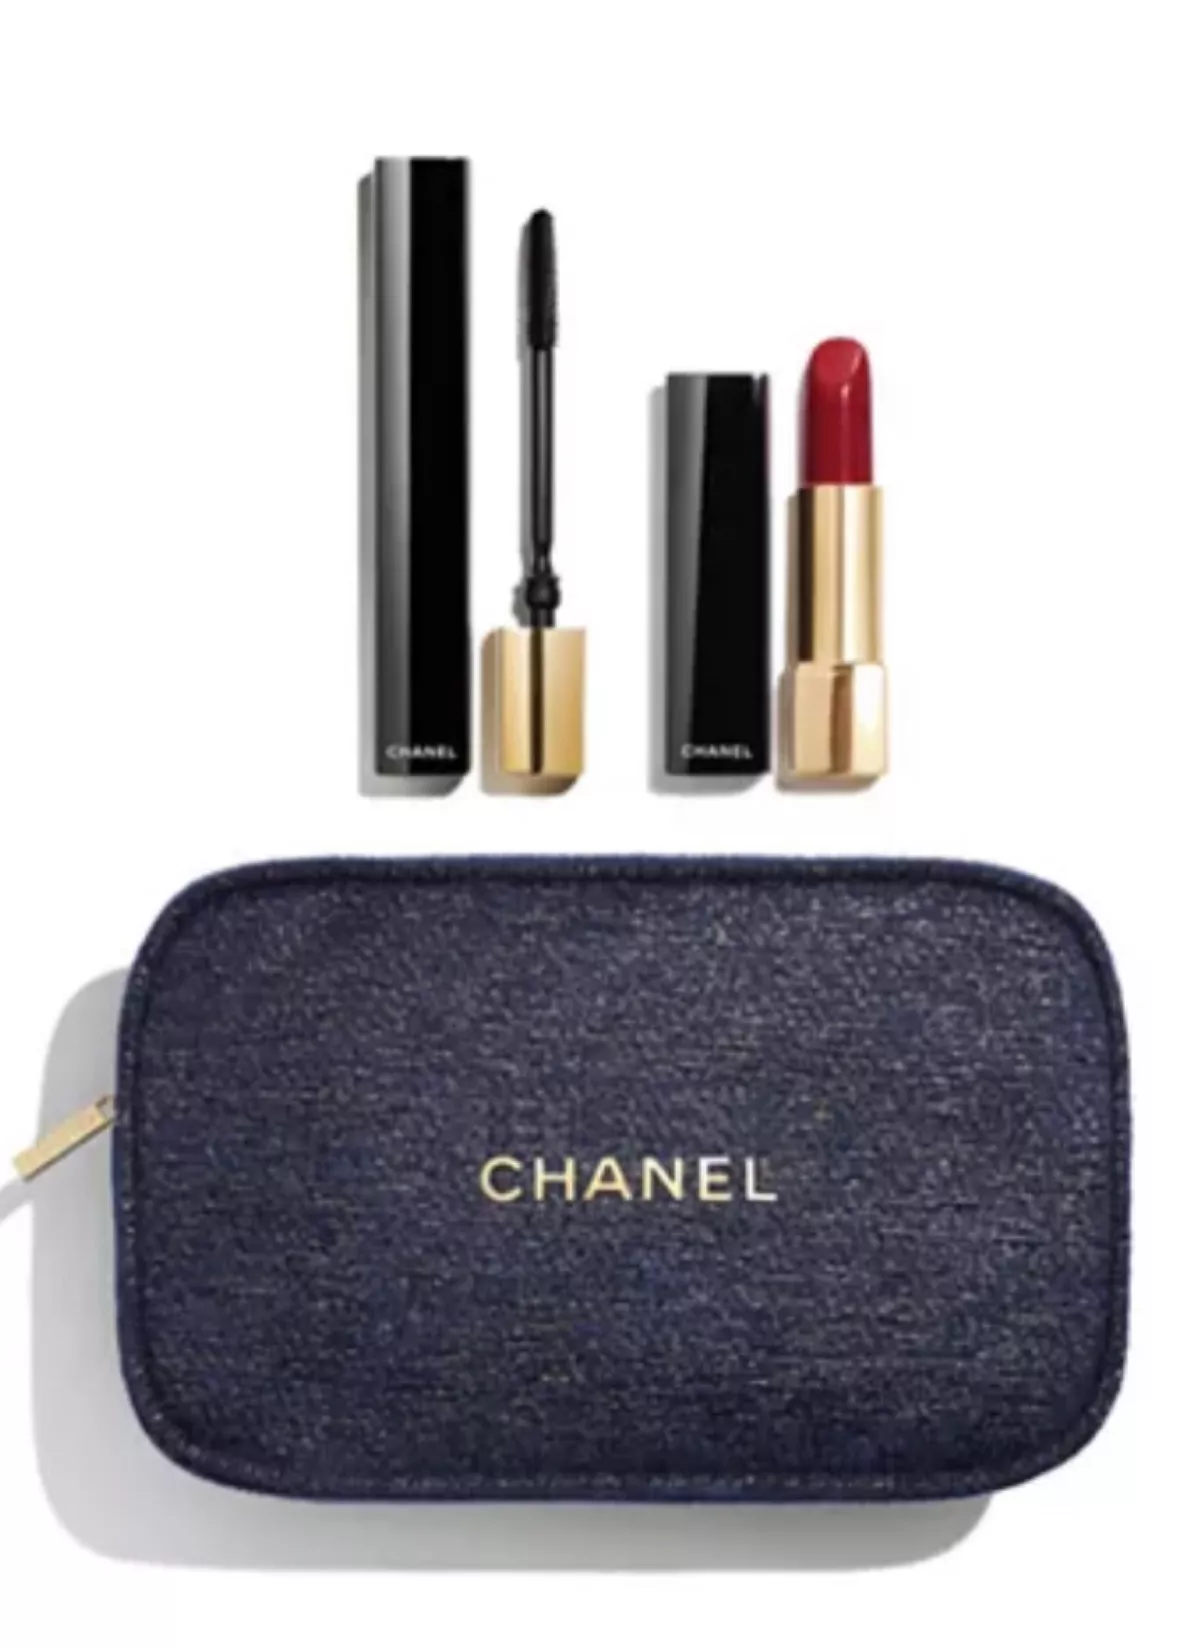 CHANEL Eye Makeup Set - Macy's curated on LTK